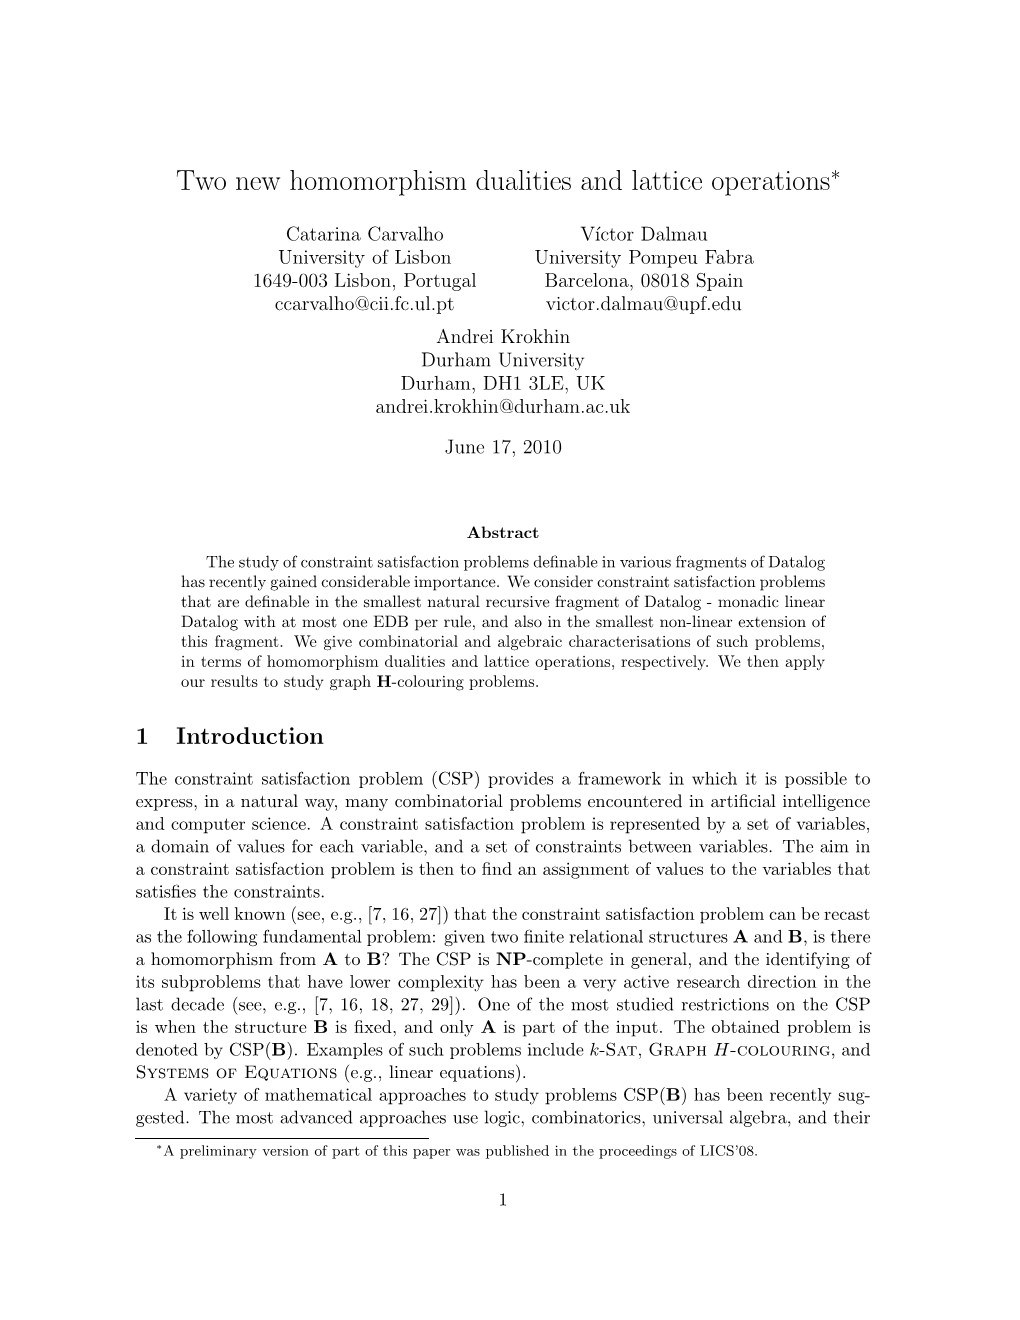 Two New Homomorphism Dualities and Lattice Operations∗